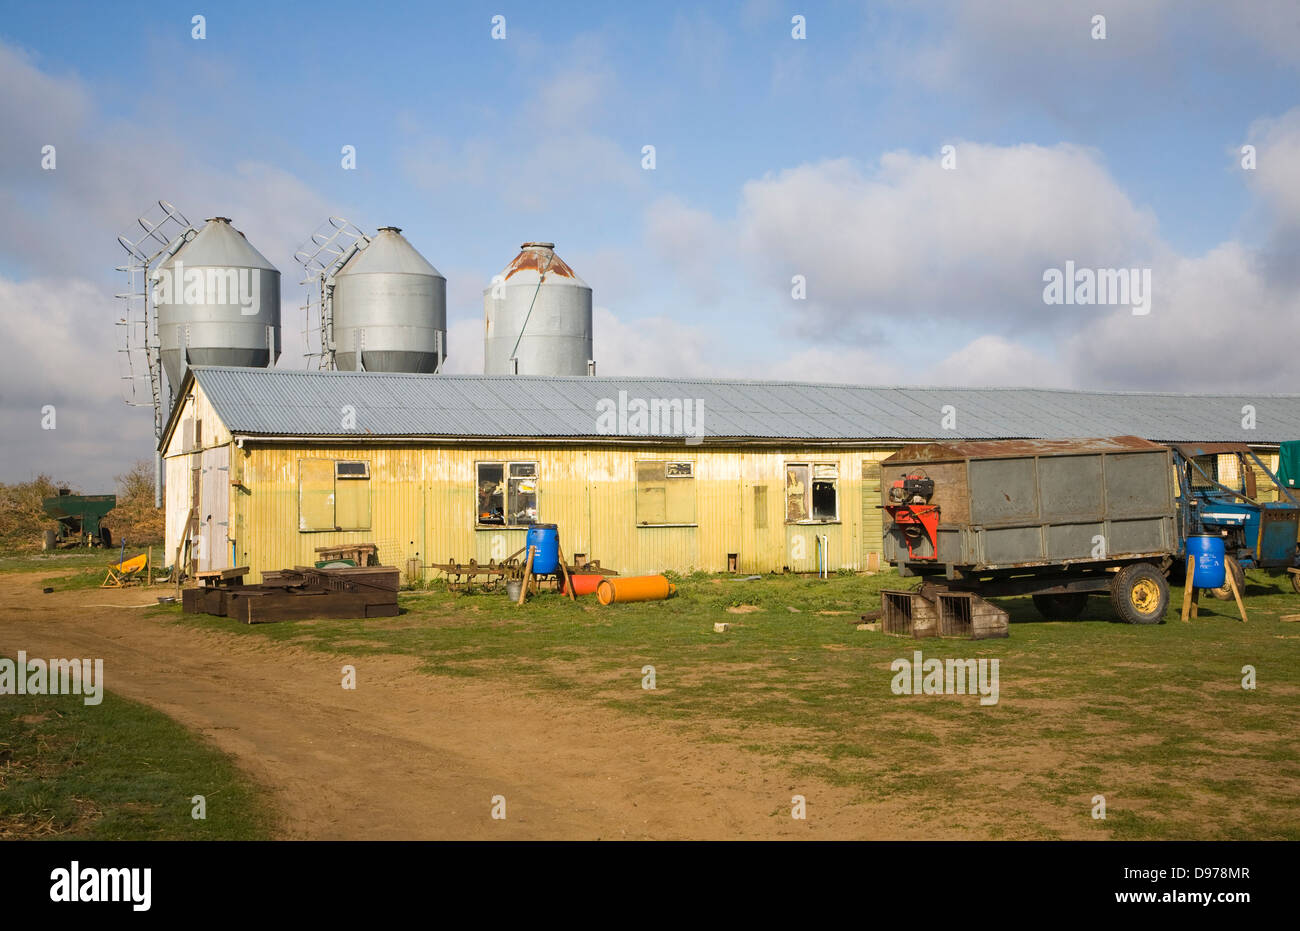 To be captioned after editing Three metal feed storage silos and barn in farmyard, Alderton, Suffolk, England Stock Photo